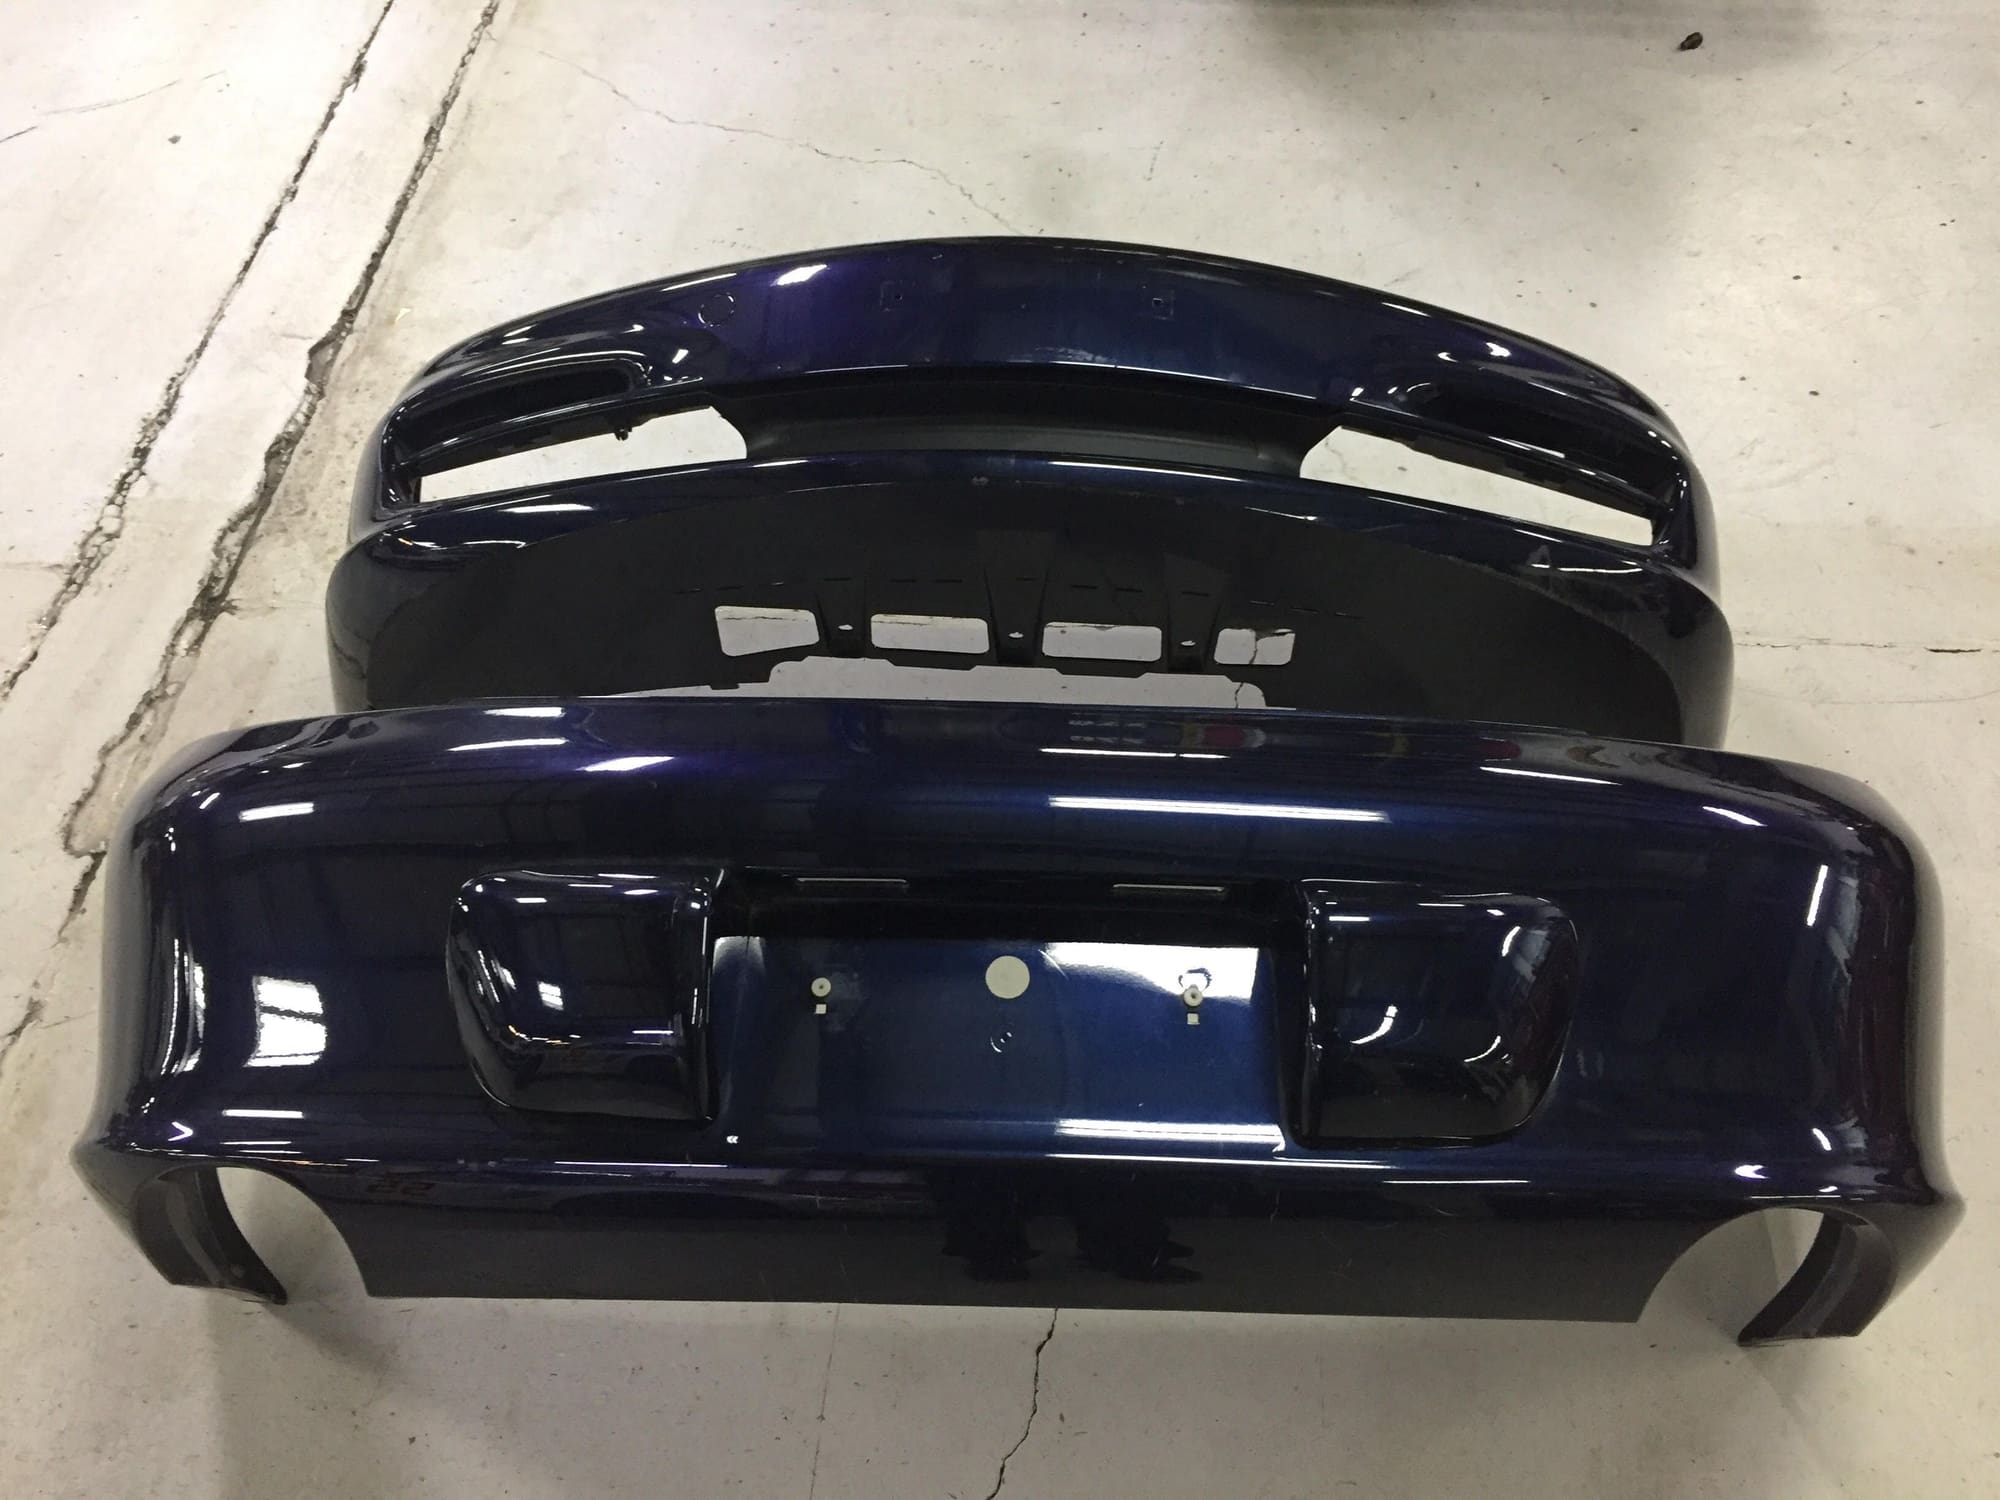 Exterior Body Parts - 996 02 and up bumpers Lapis blue - Used - 2002 to 2005 Porsche 911 - Danbury, CT 06810, United States